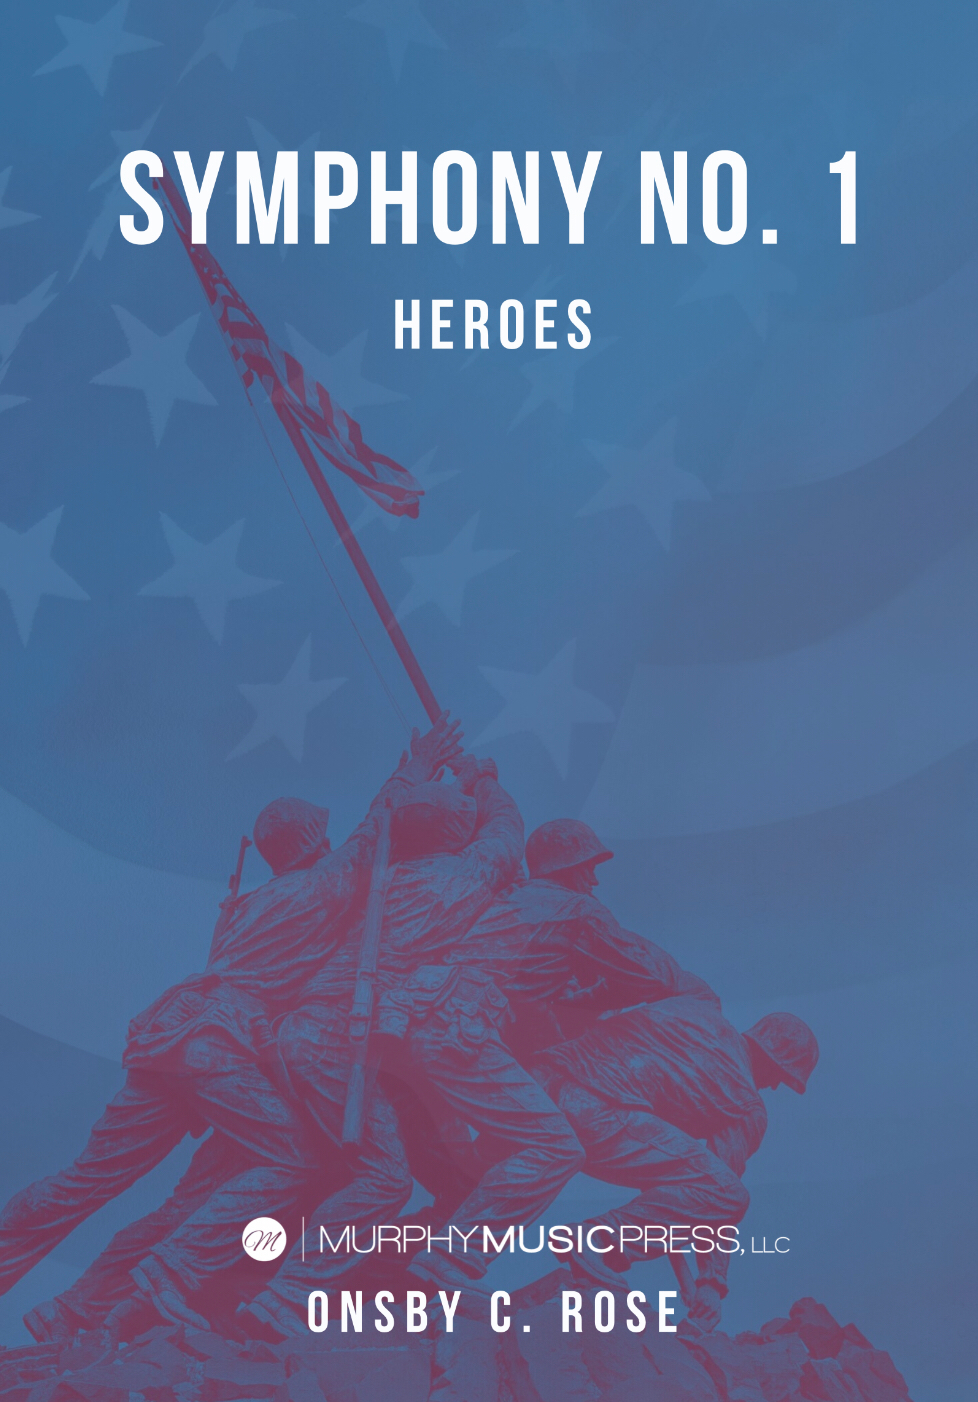 Symphony No, 1: Heroes (Score Only) by Onsby C. Rose